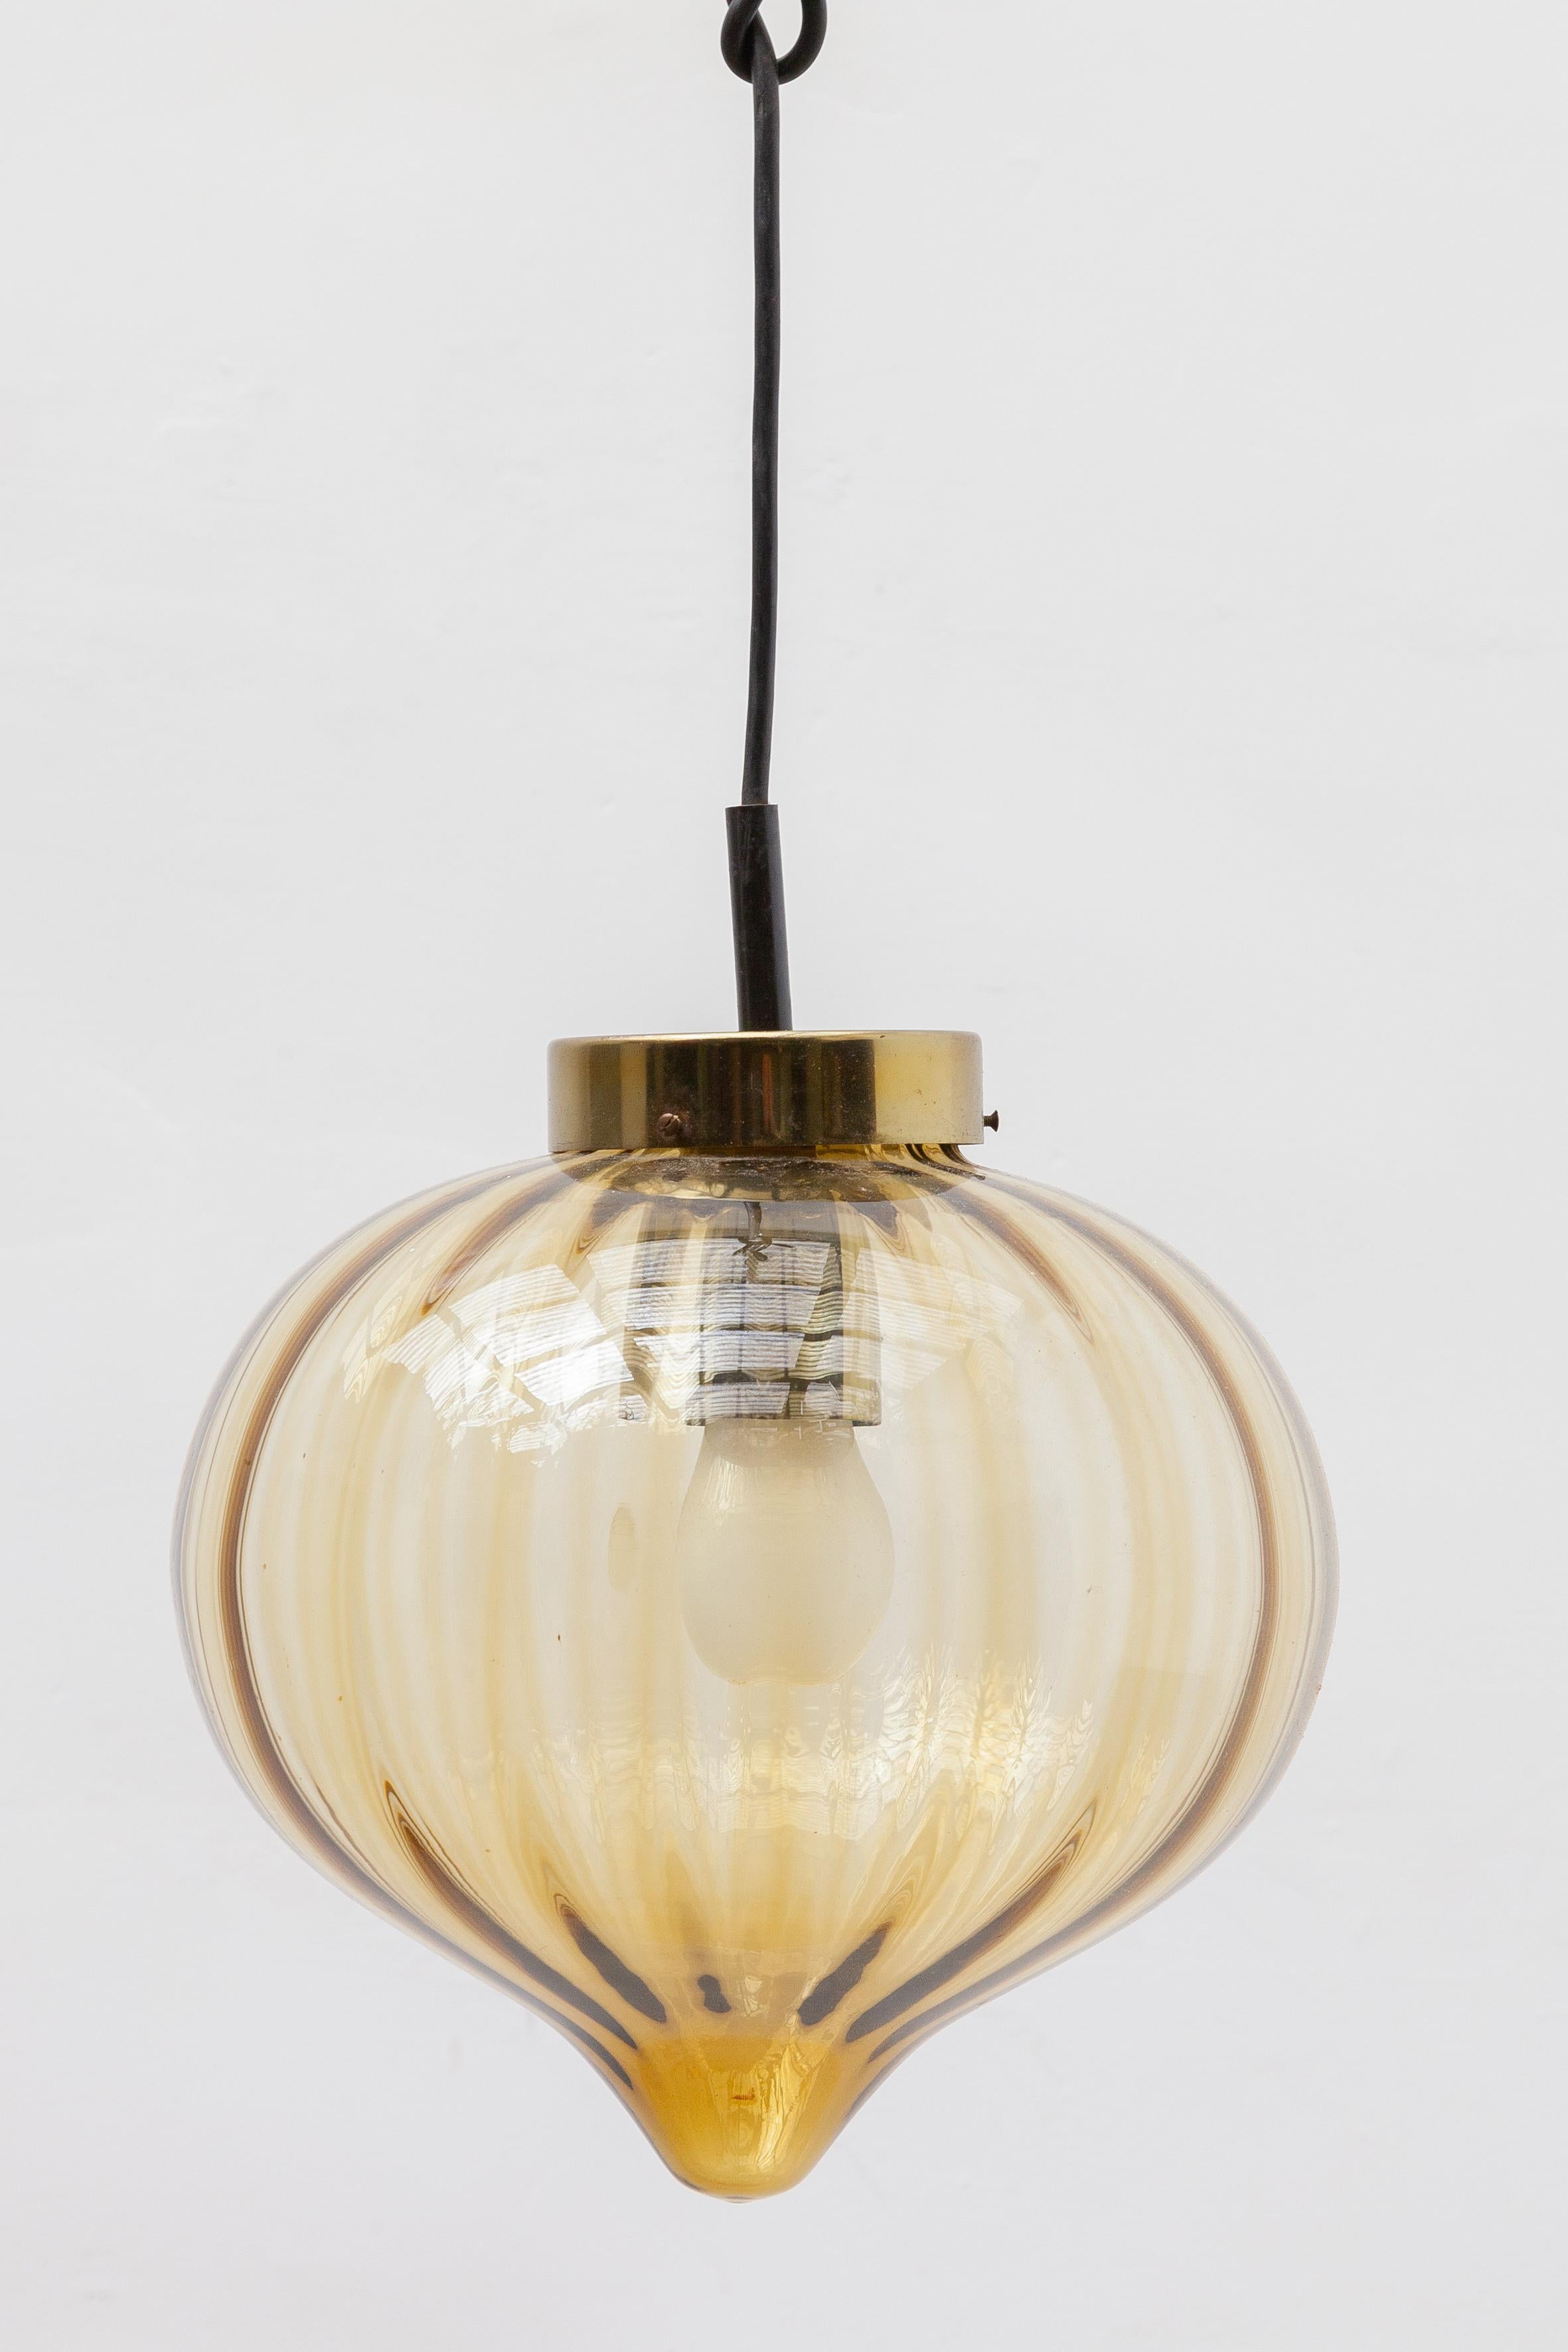 Amber Raak Glass Pendant Light Hand Blown, 1970s In Good Condition For Sale In Antwerp, BE